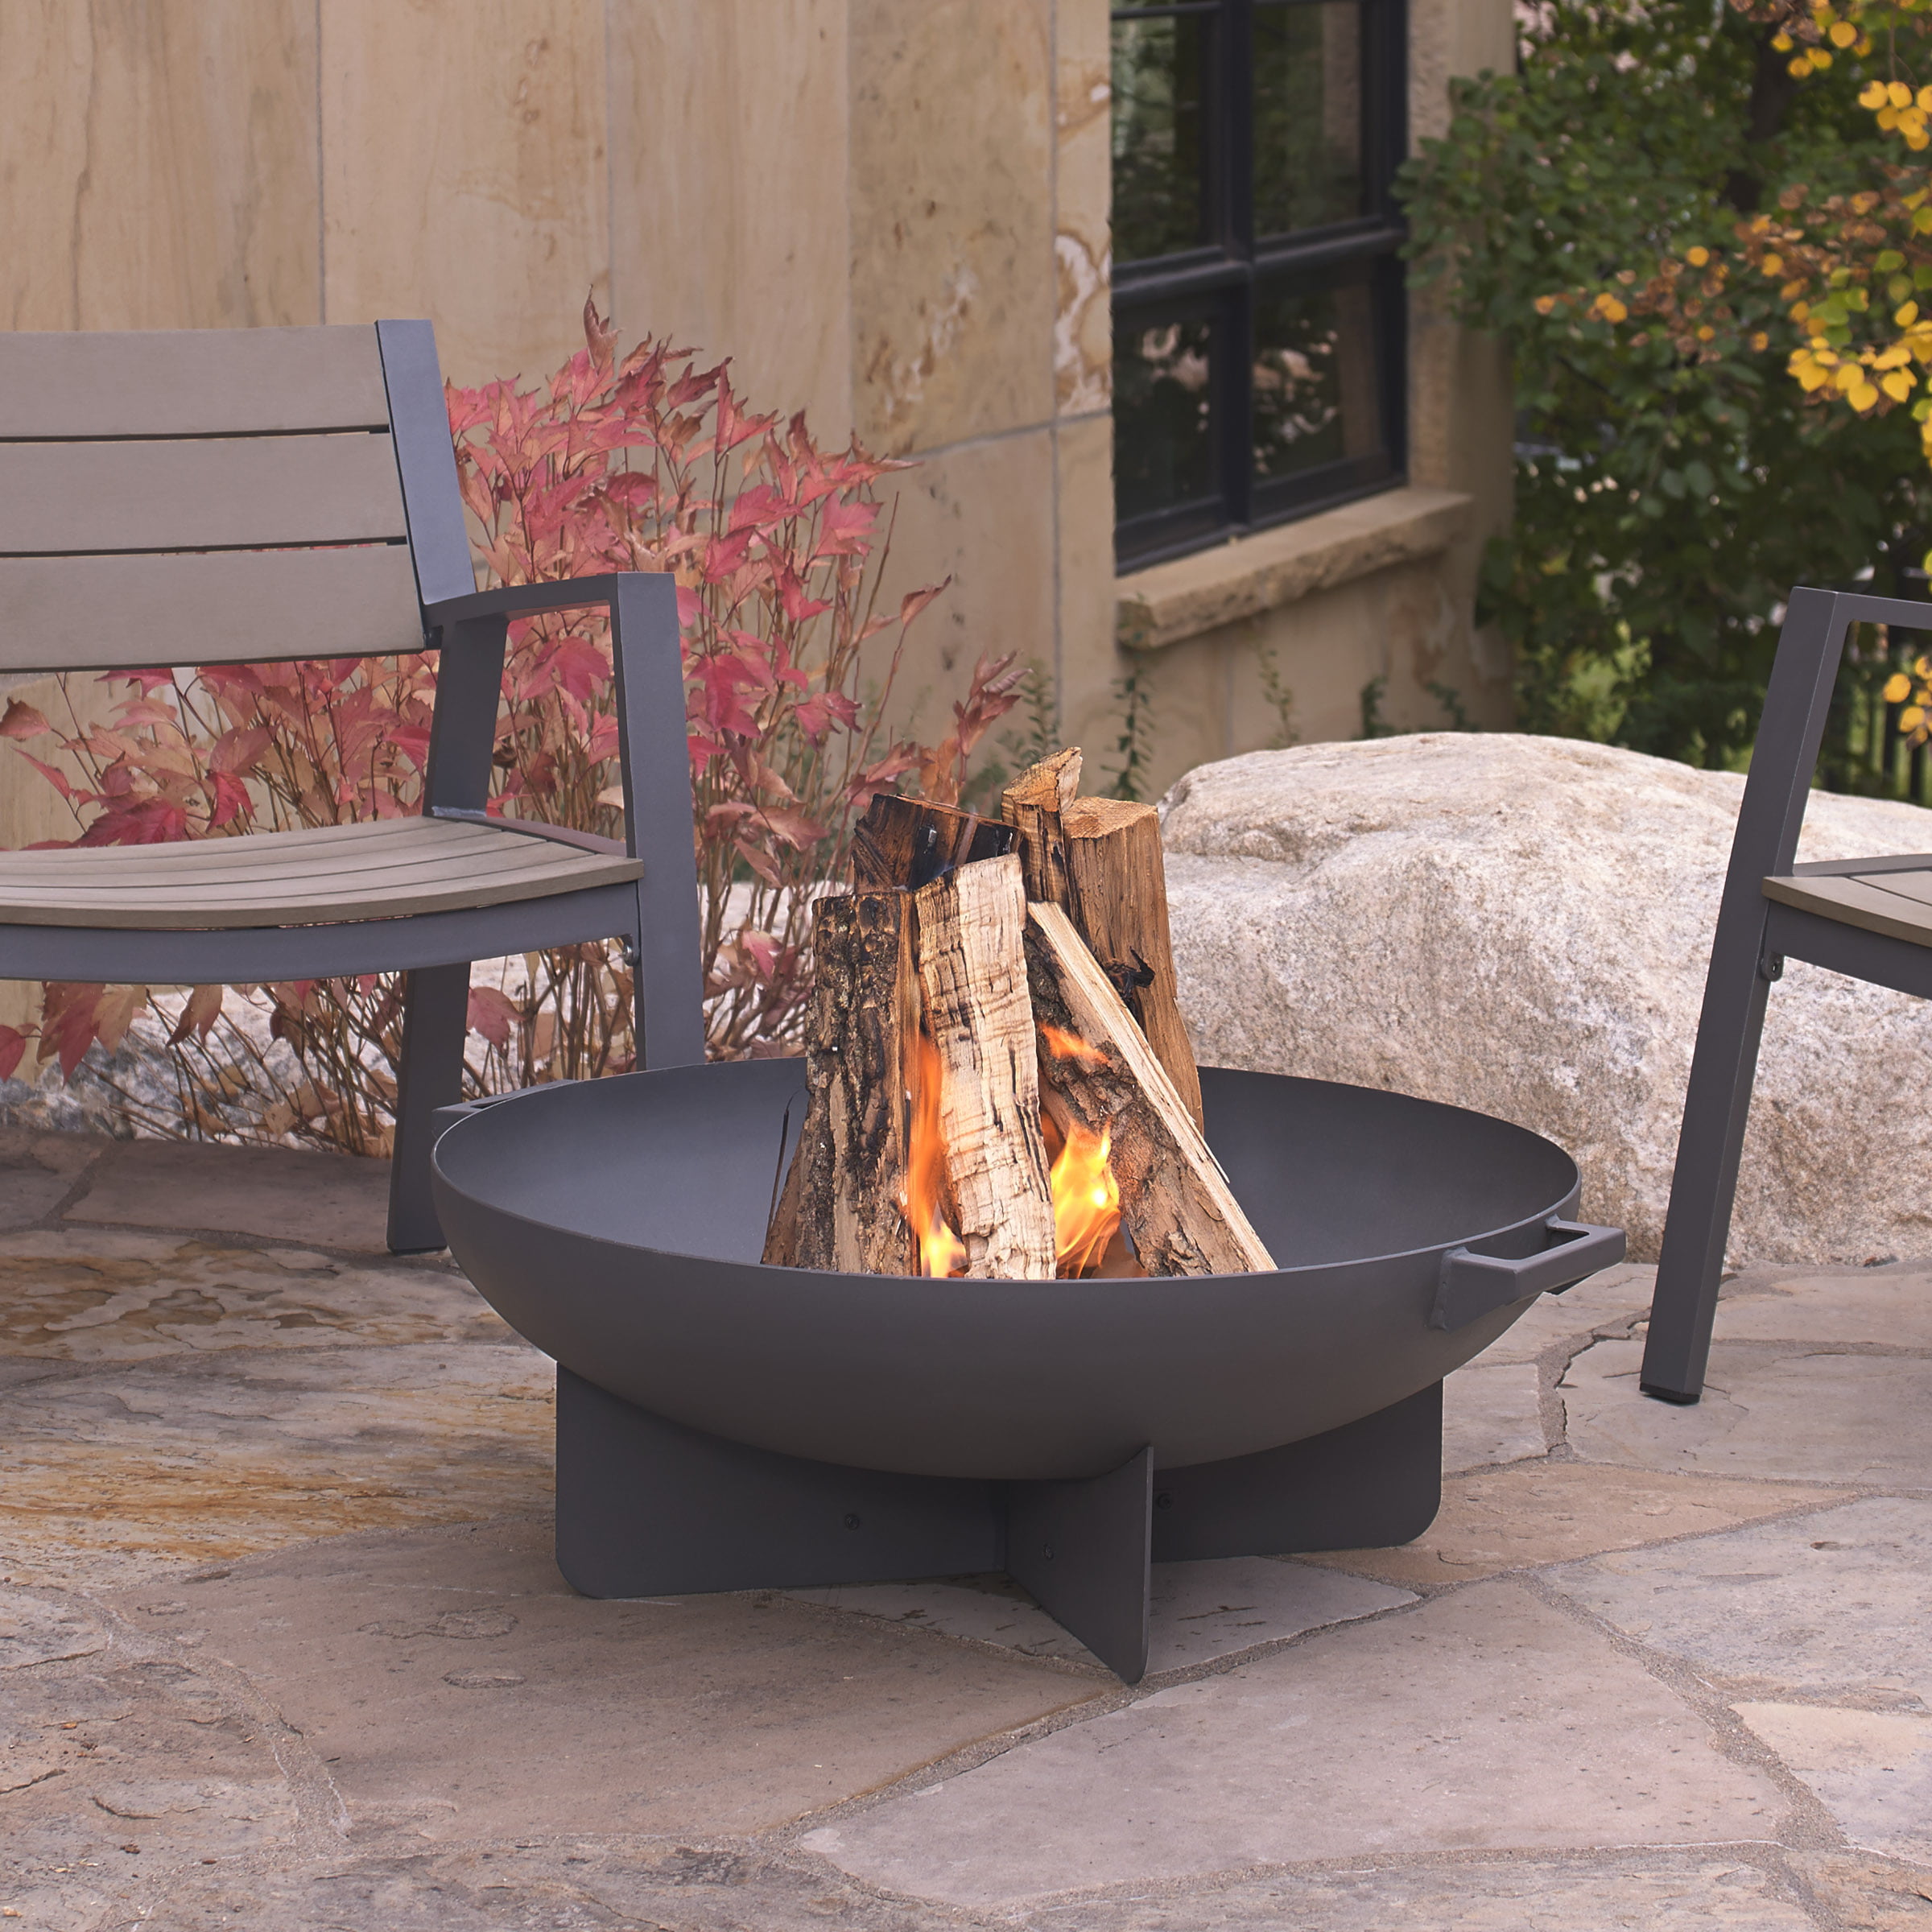 Details about   Safari Themed Hexagonal fire Pit With Black Finish 